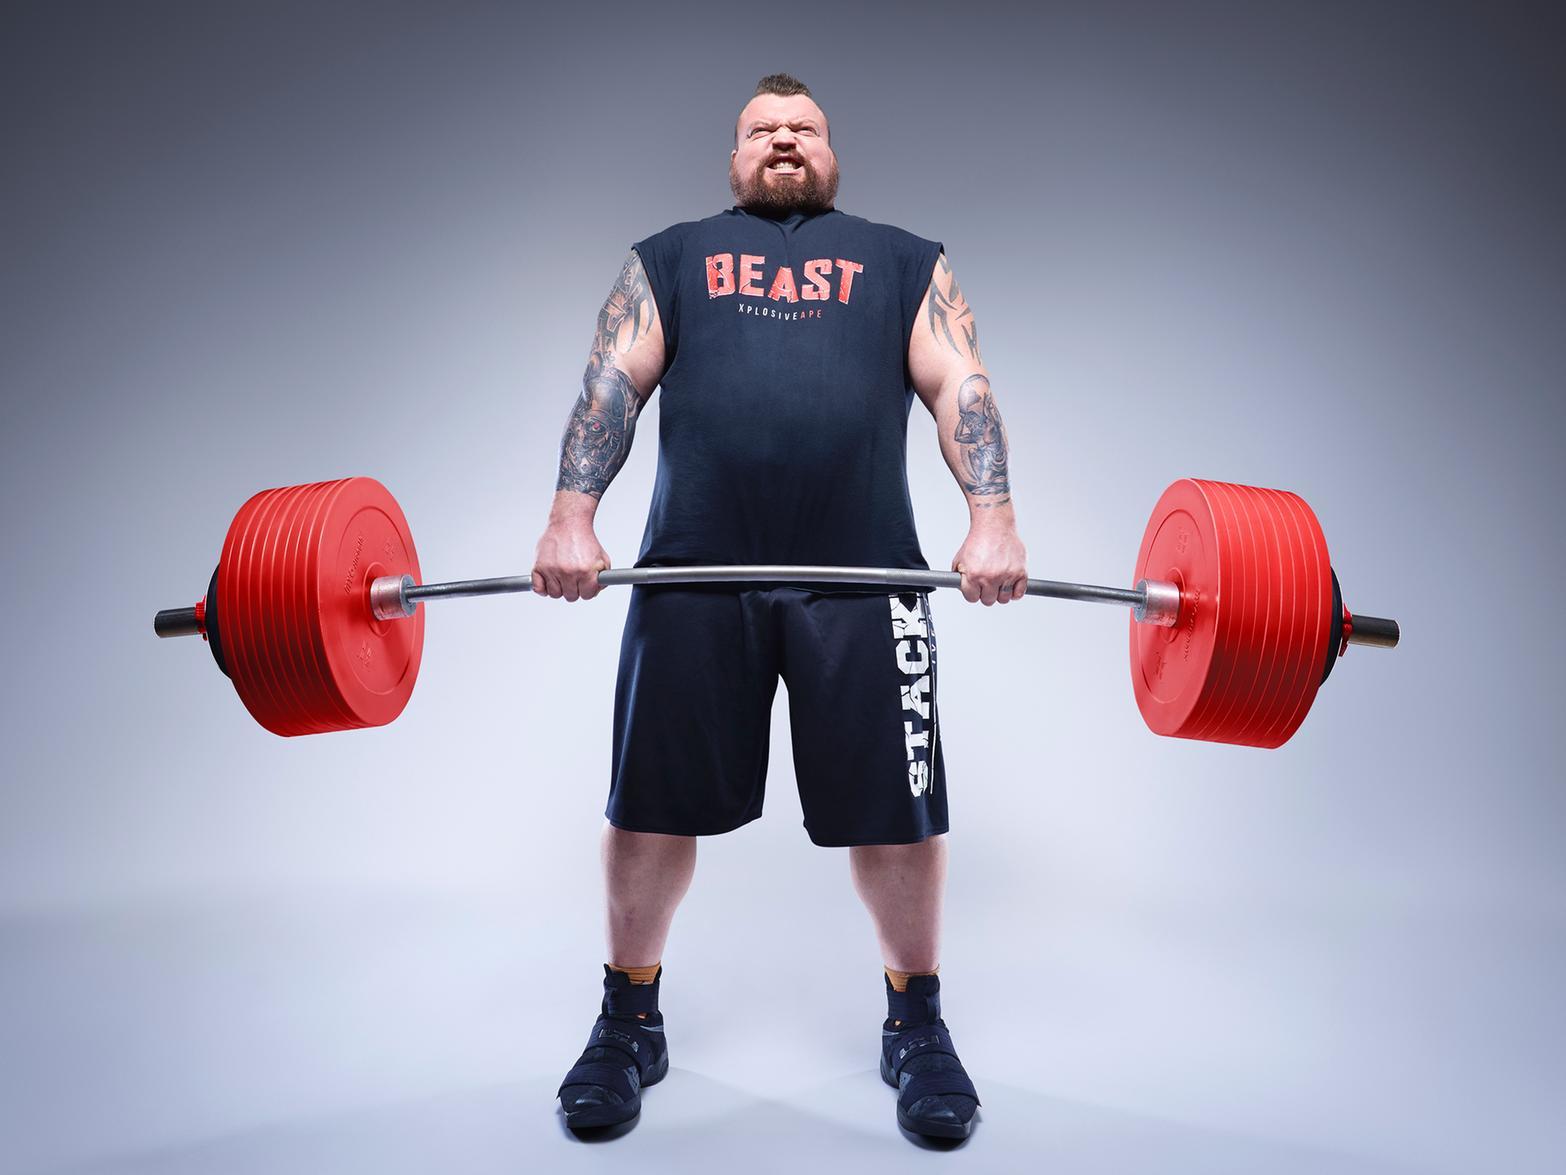 The heaviest Strongman deadlift is 500 kg (1,102 lb 4.9 oz) and was achieved by Eddie Hall (UK) at the World Deadlift Championships at the First Direct Arena, in Leeds, UK, on 9 July 2016.